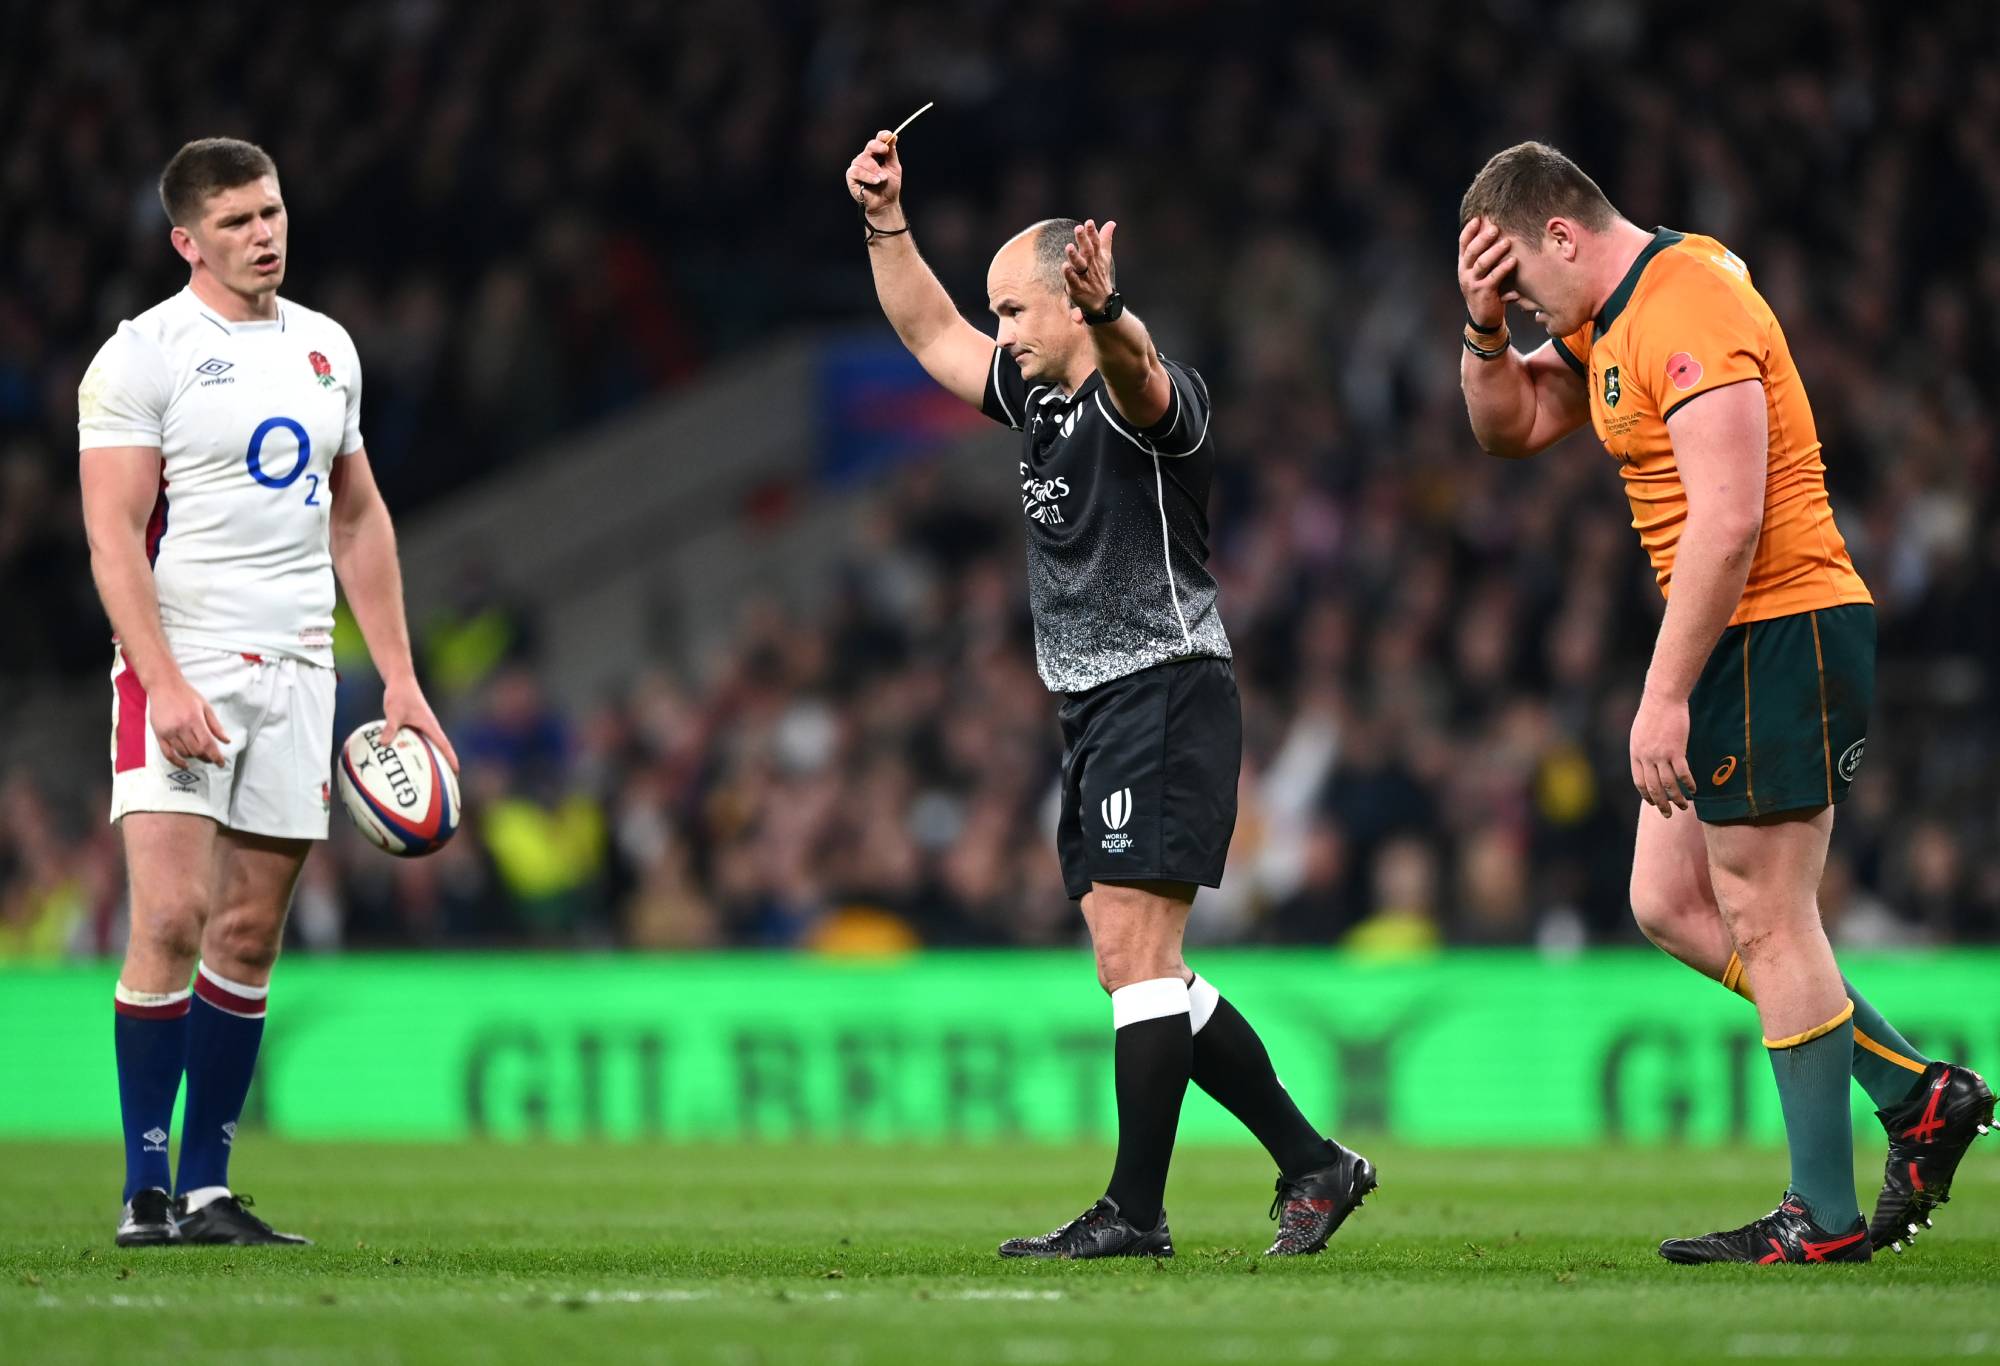 Angus Bell of Australia reacts as he receives a yellow card from referee Jaco Peyper during the Autumn Nations Series match between England and Australia at Twickenham Stadium on November 13, 2021 in London, in England.  (Photo by Shaun Botterill/Getty Images)